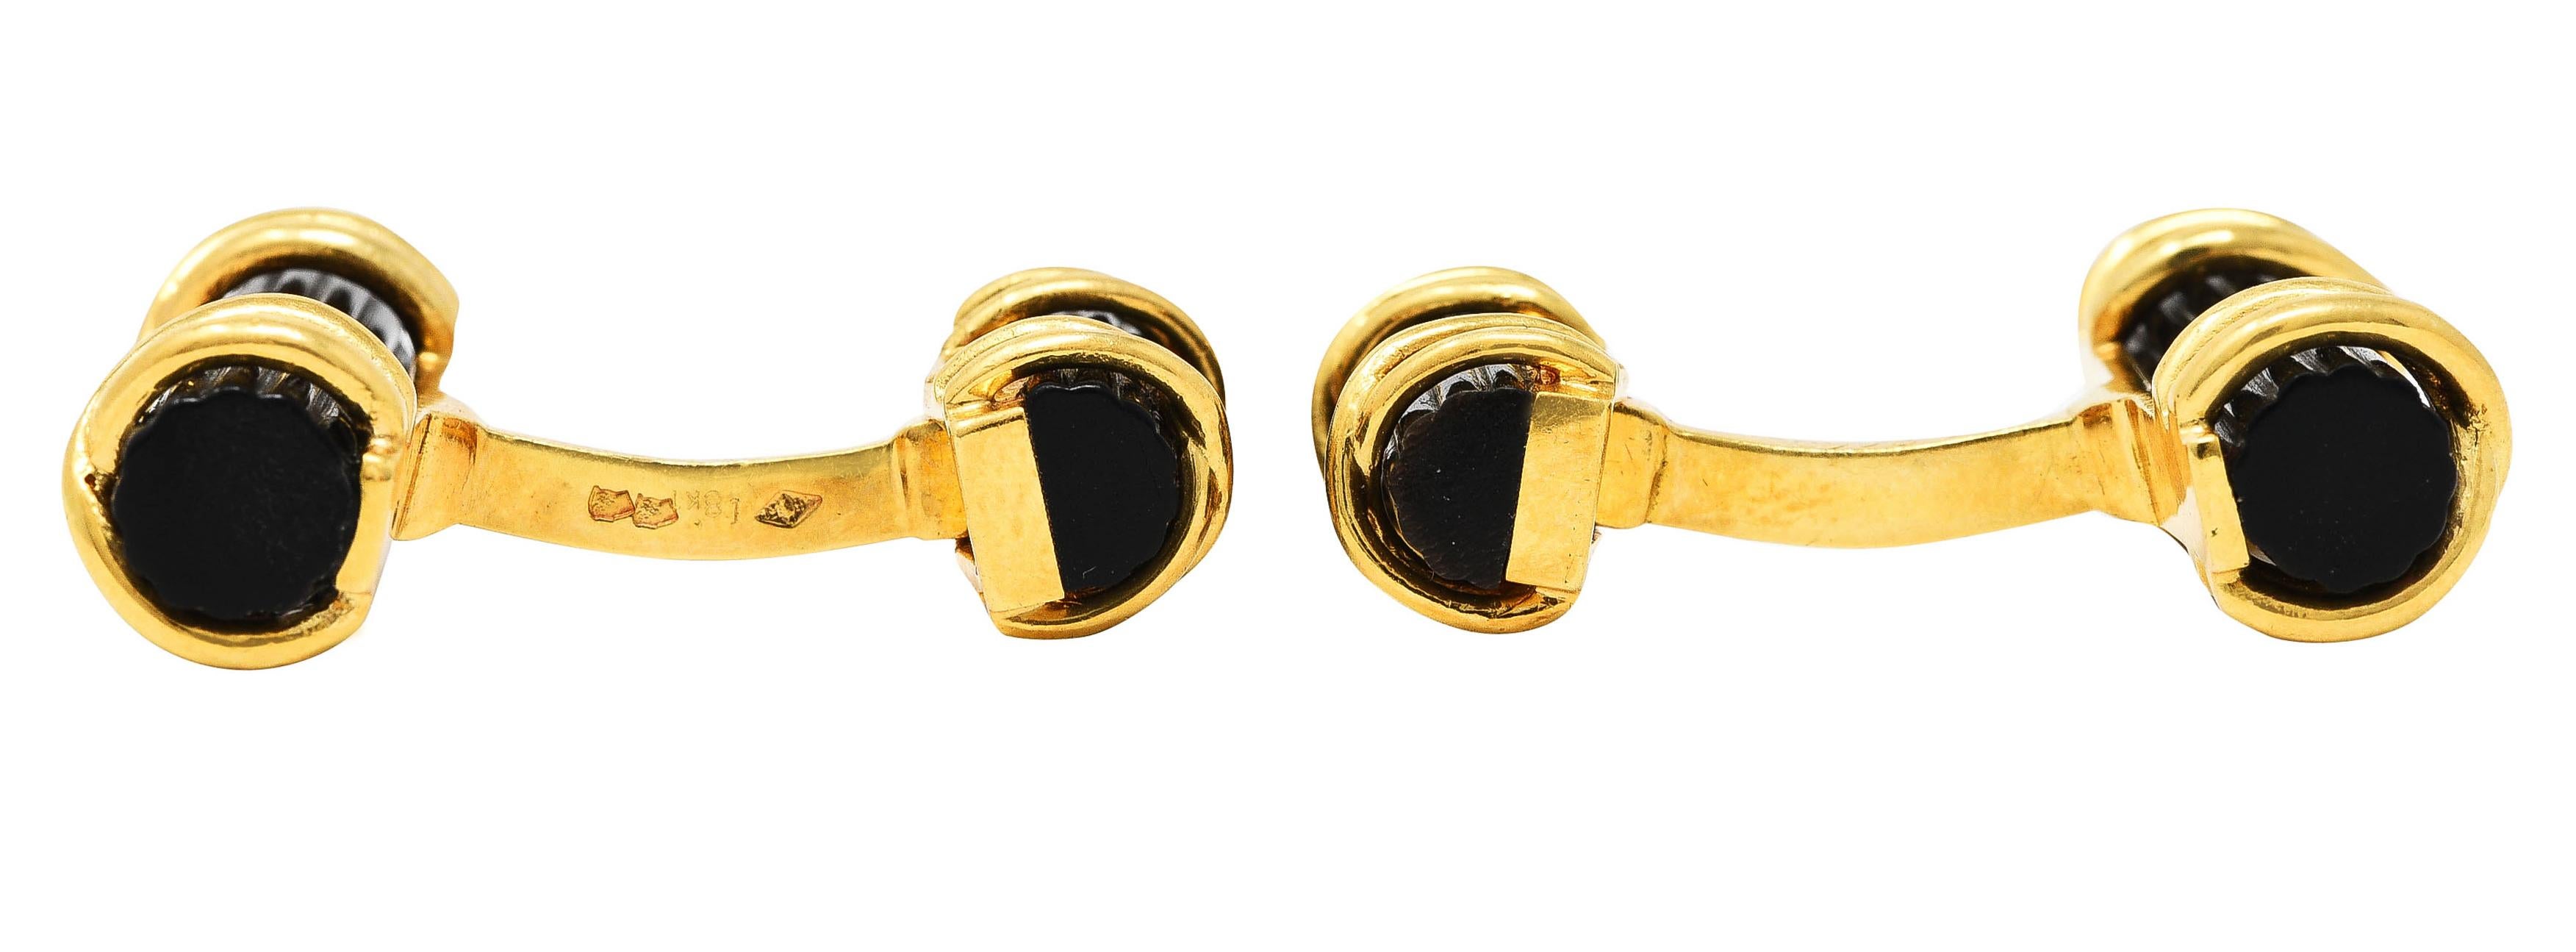 Tiffany & Co. French Carved Horn 18 Karat Yellow Gold Vintage Men's Cufflinks 2